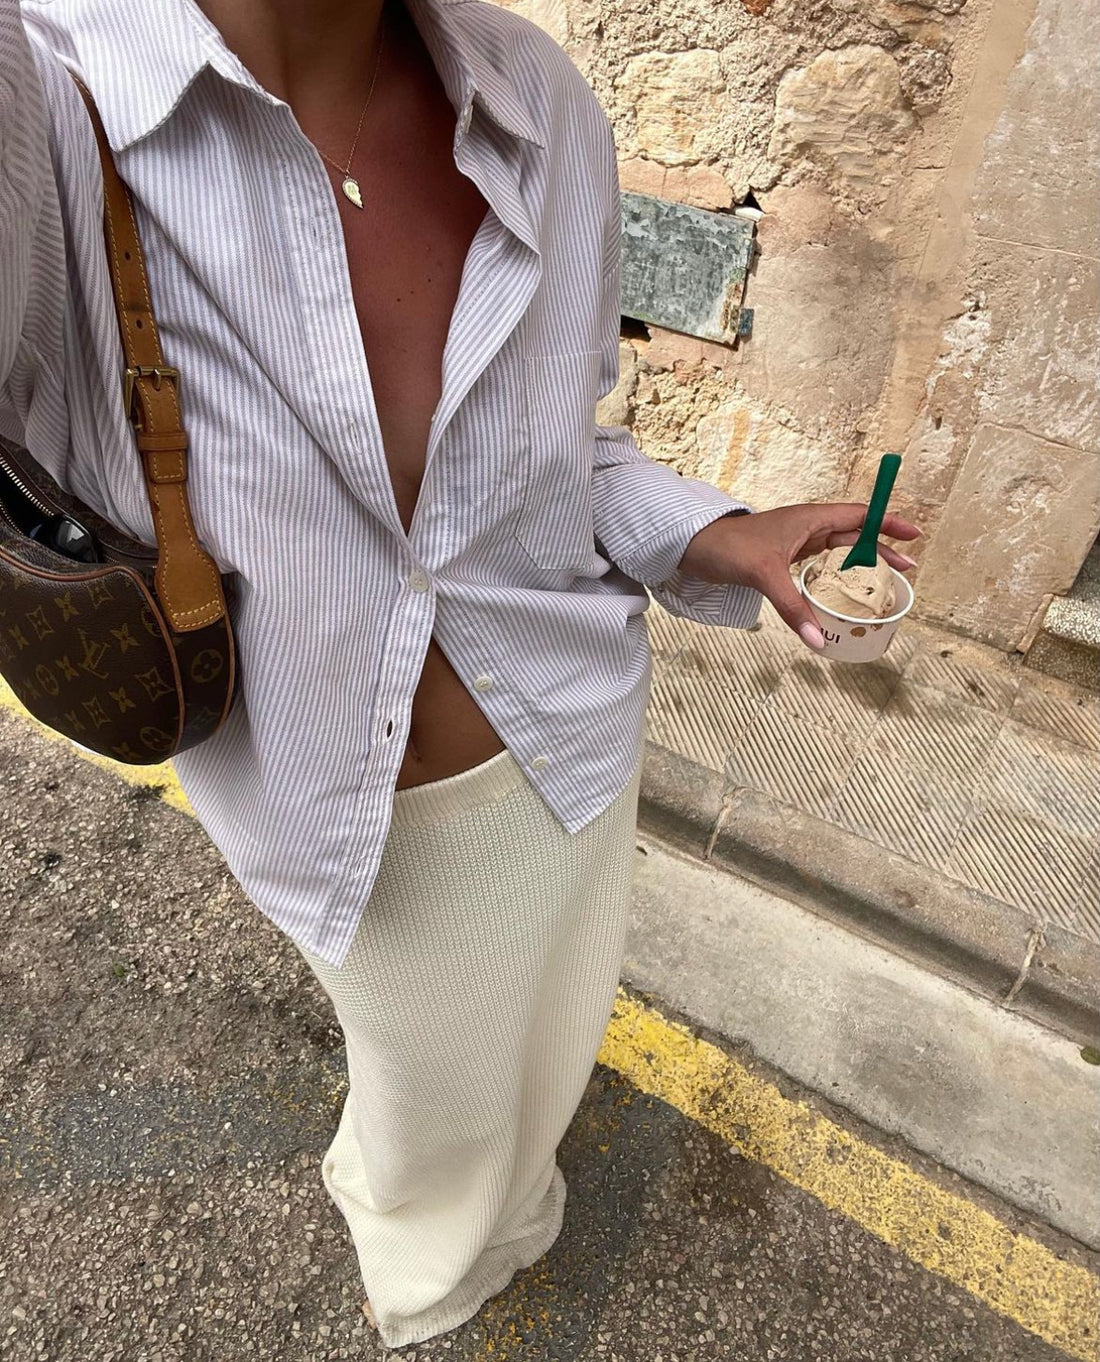 Matilda Djerf outfit with Louis Vuitton Croissant Bag